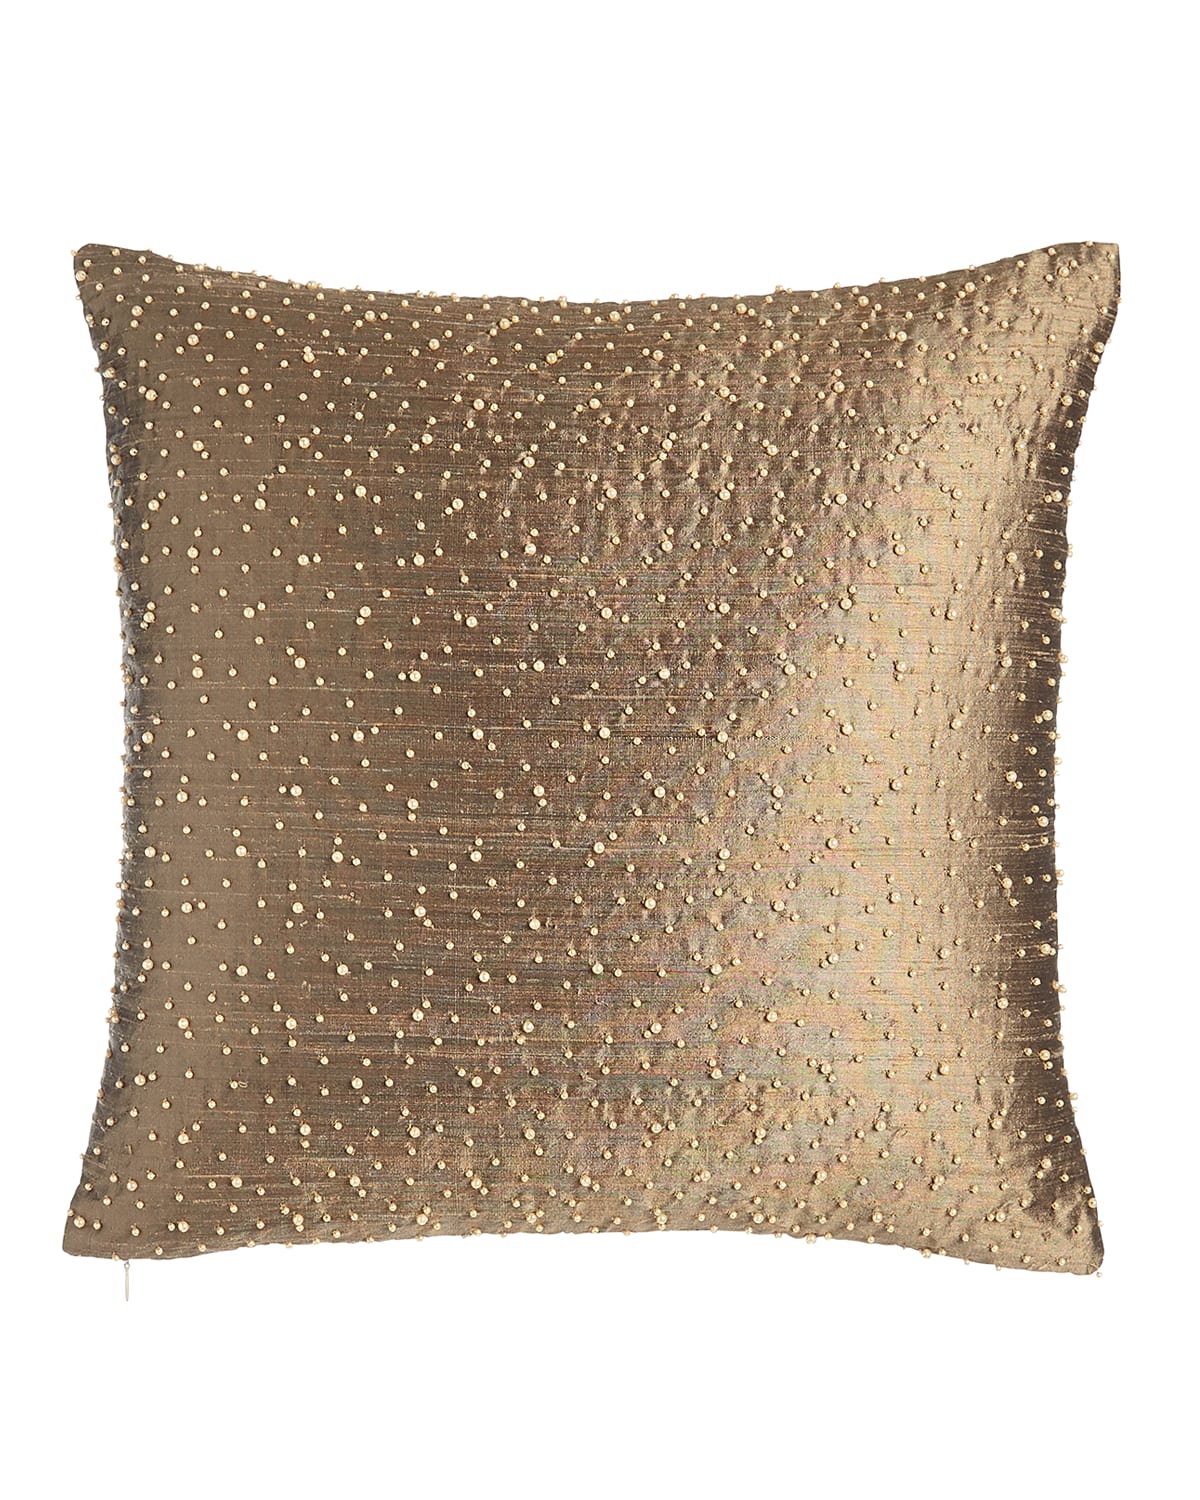 Austin Horn Collection Vienna Beaded Pillow, 17"sq. In Brown